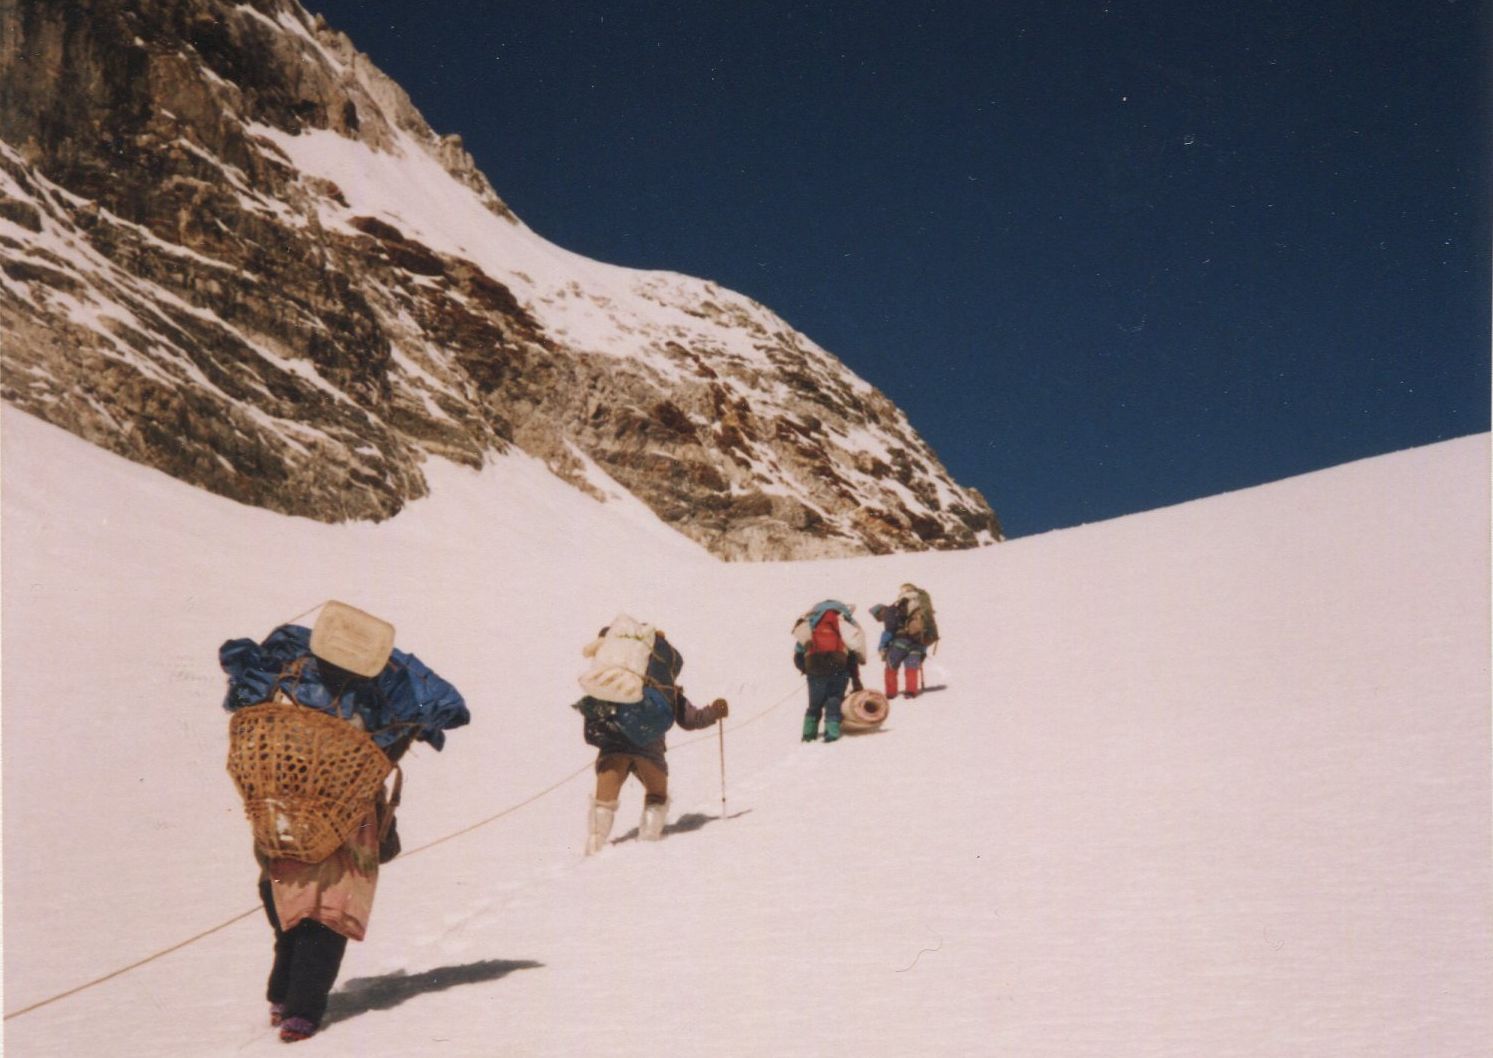 Ascent of Upper Balephi Glacier to Tilman's Pass